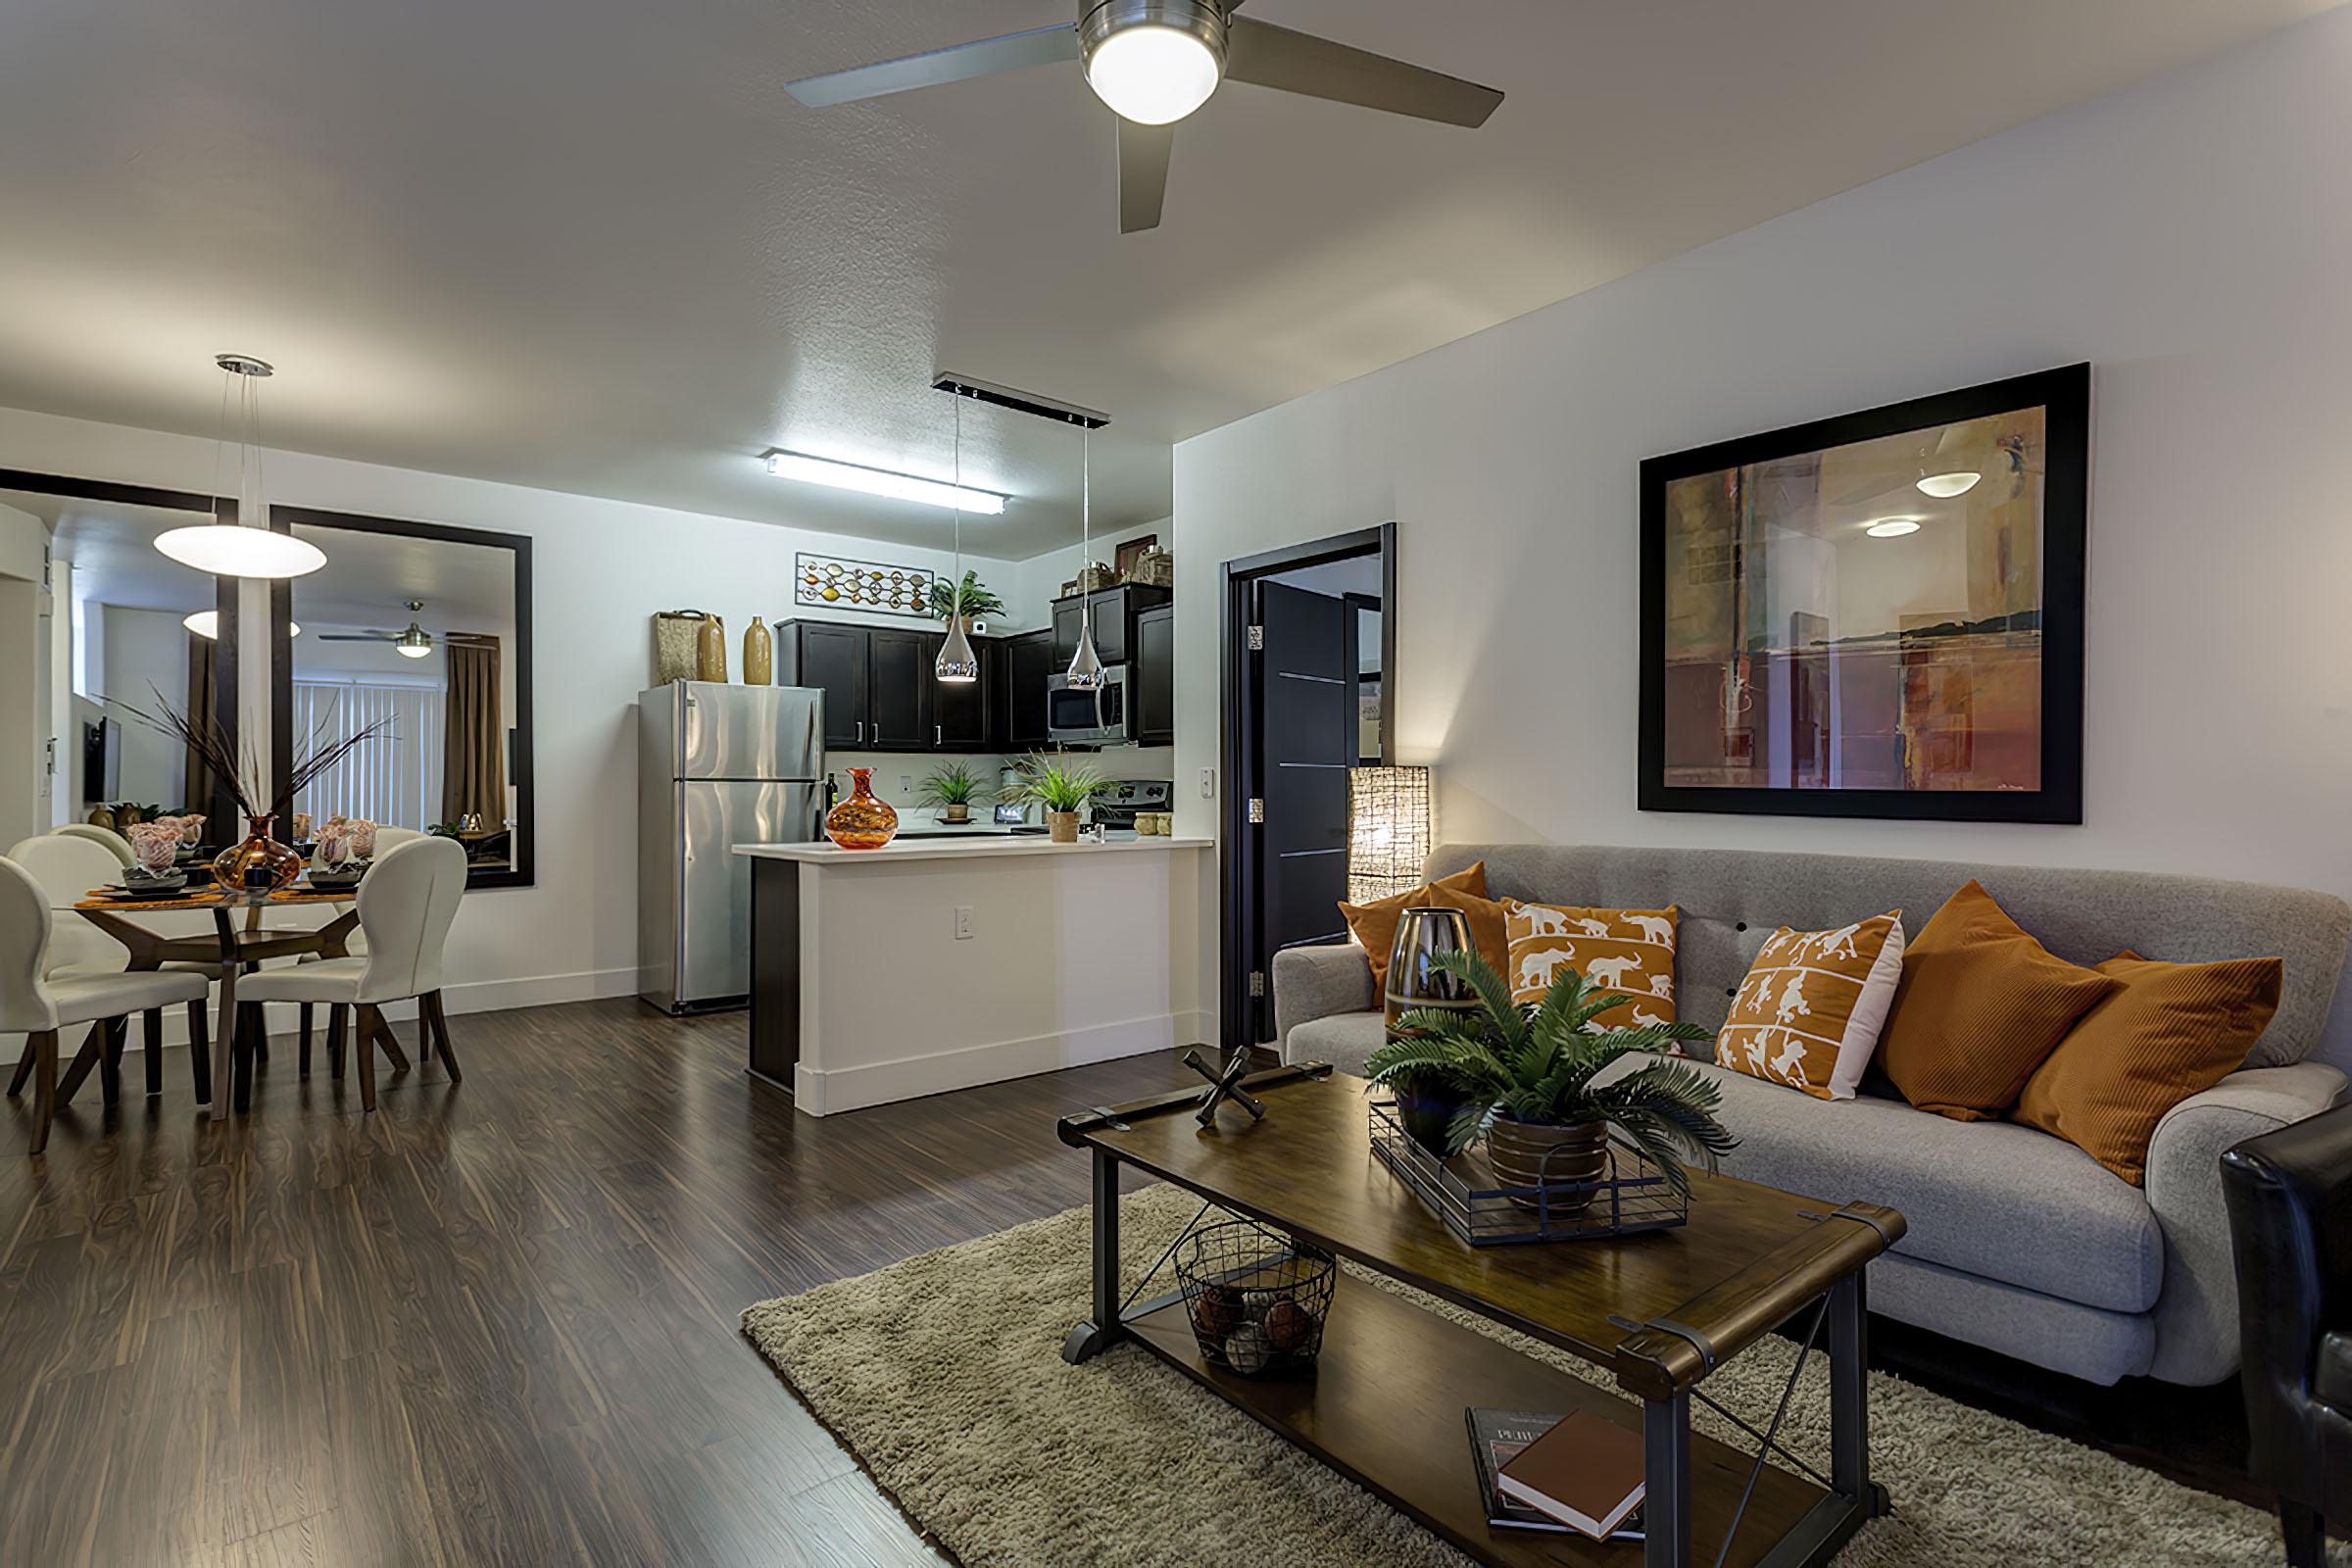 STUNNING APARTMENTS FOR RENT IN LAS VEGAS, NEVADA